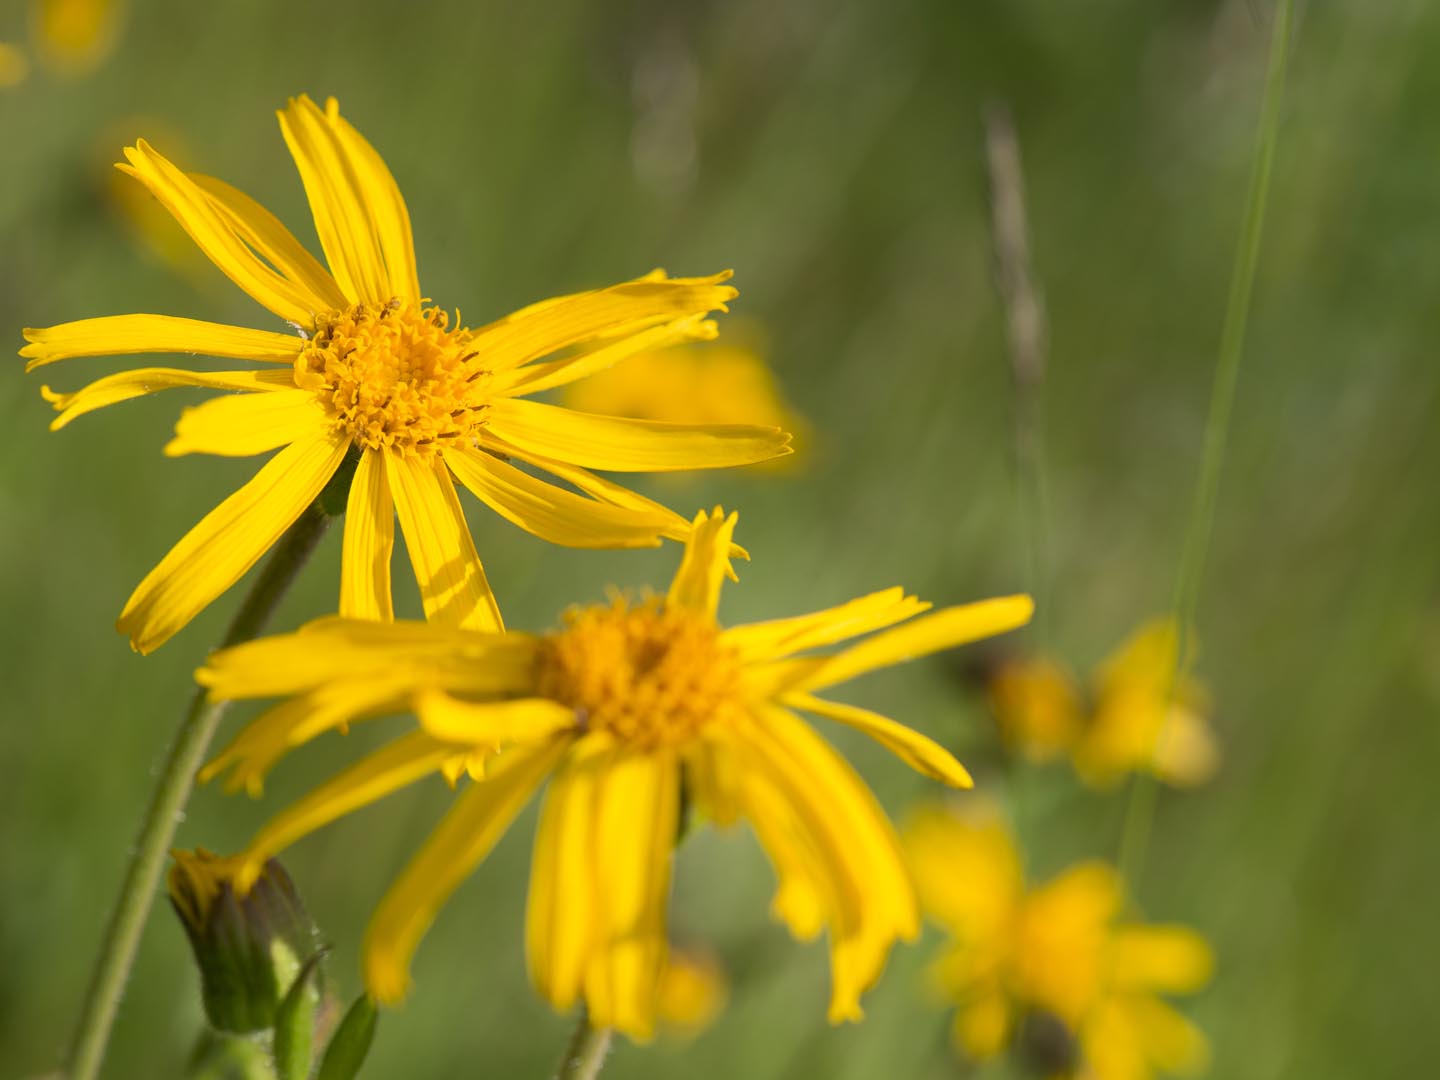 Arnica for Pain? - Ask Dr. Weil